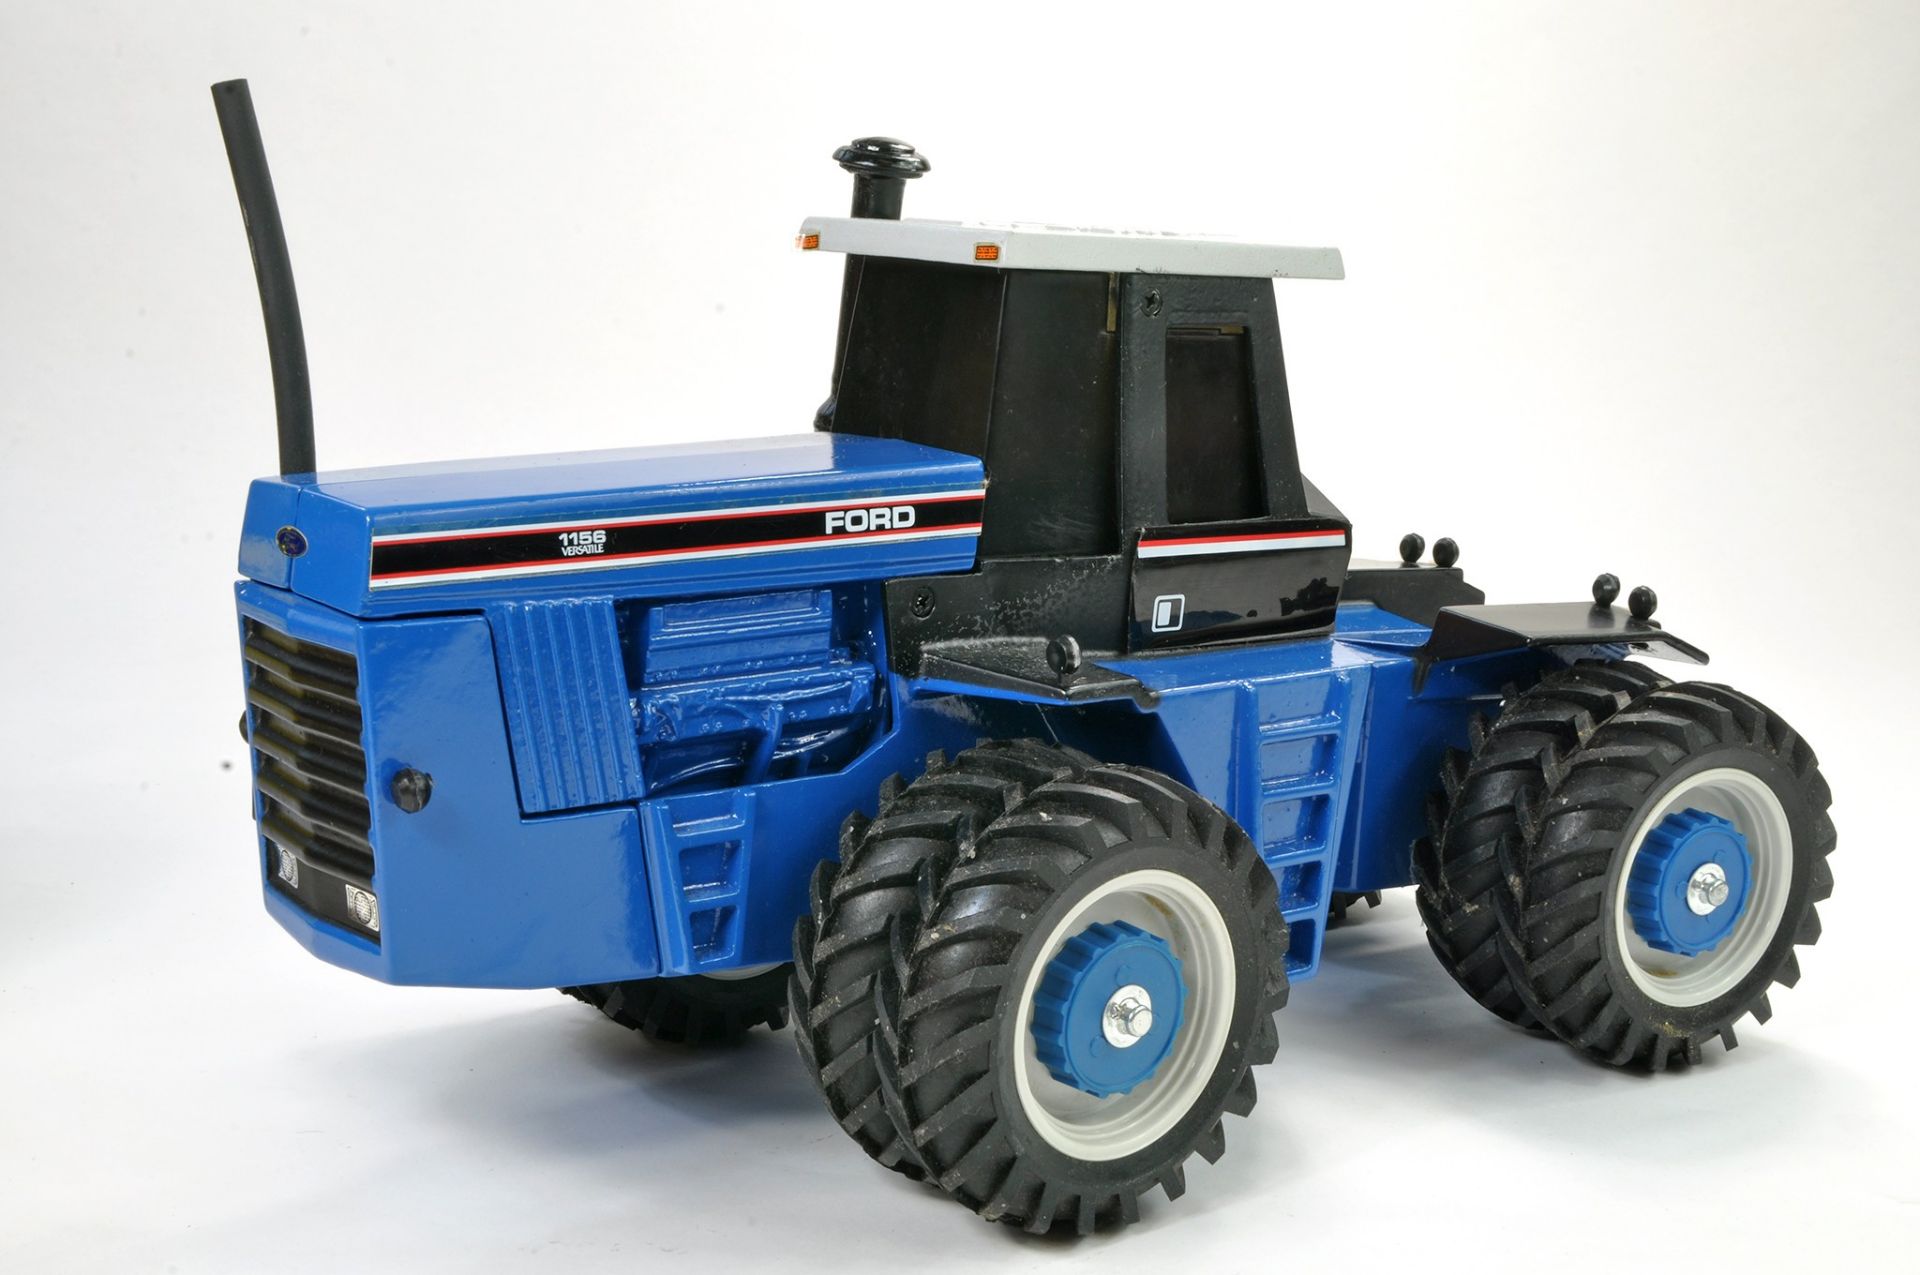 Scale Models 1/16 Model Issue comprising Ford Versatile 1156 Tractor - Paris Mart 1990, duals all-